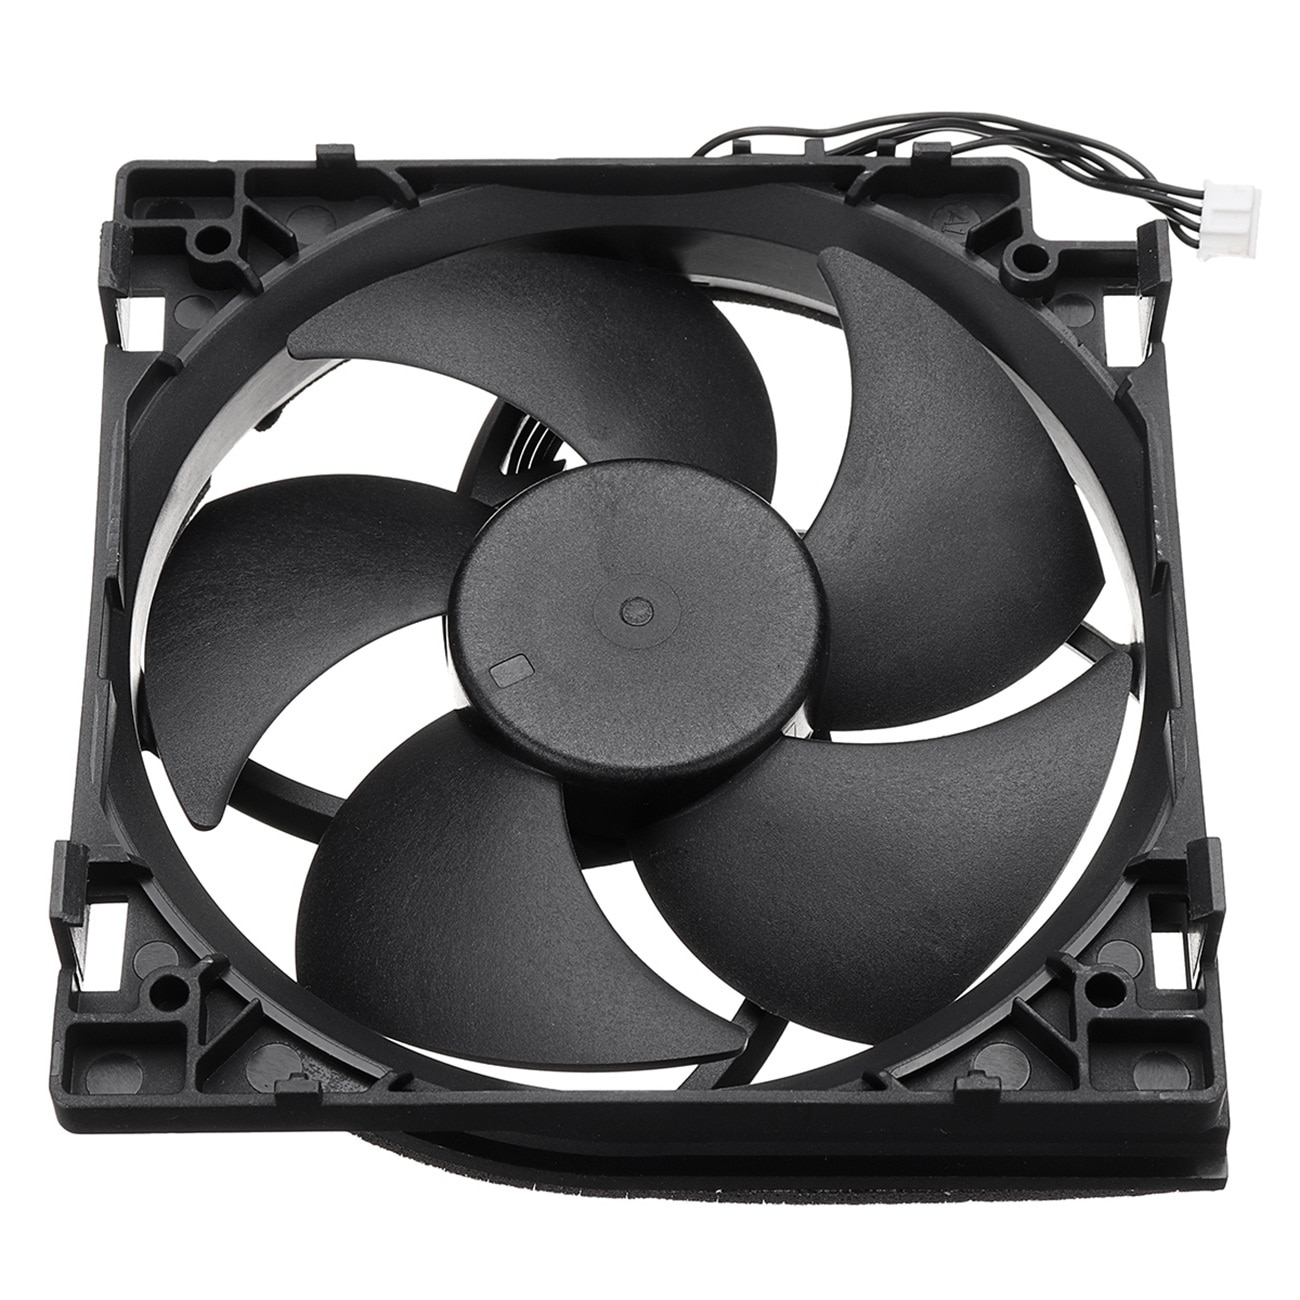 MOOL CPU Koeler Fans Vervanging Cooler Fan 5 Blades 4 Pin Connector Cooling Fan Voor Xbox ONE S